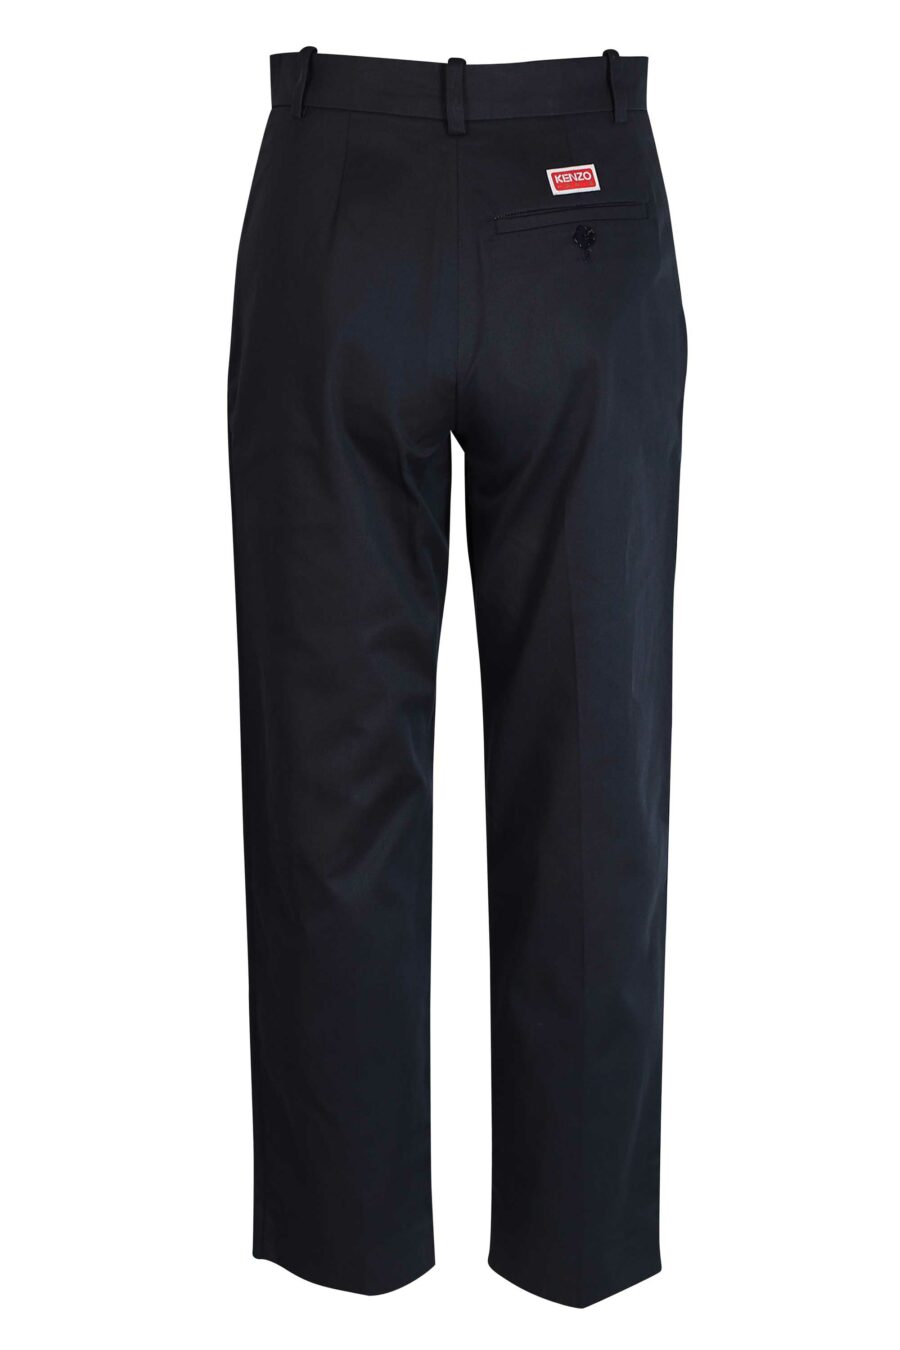 Blue trousers with logo - 3612230415409 3